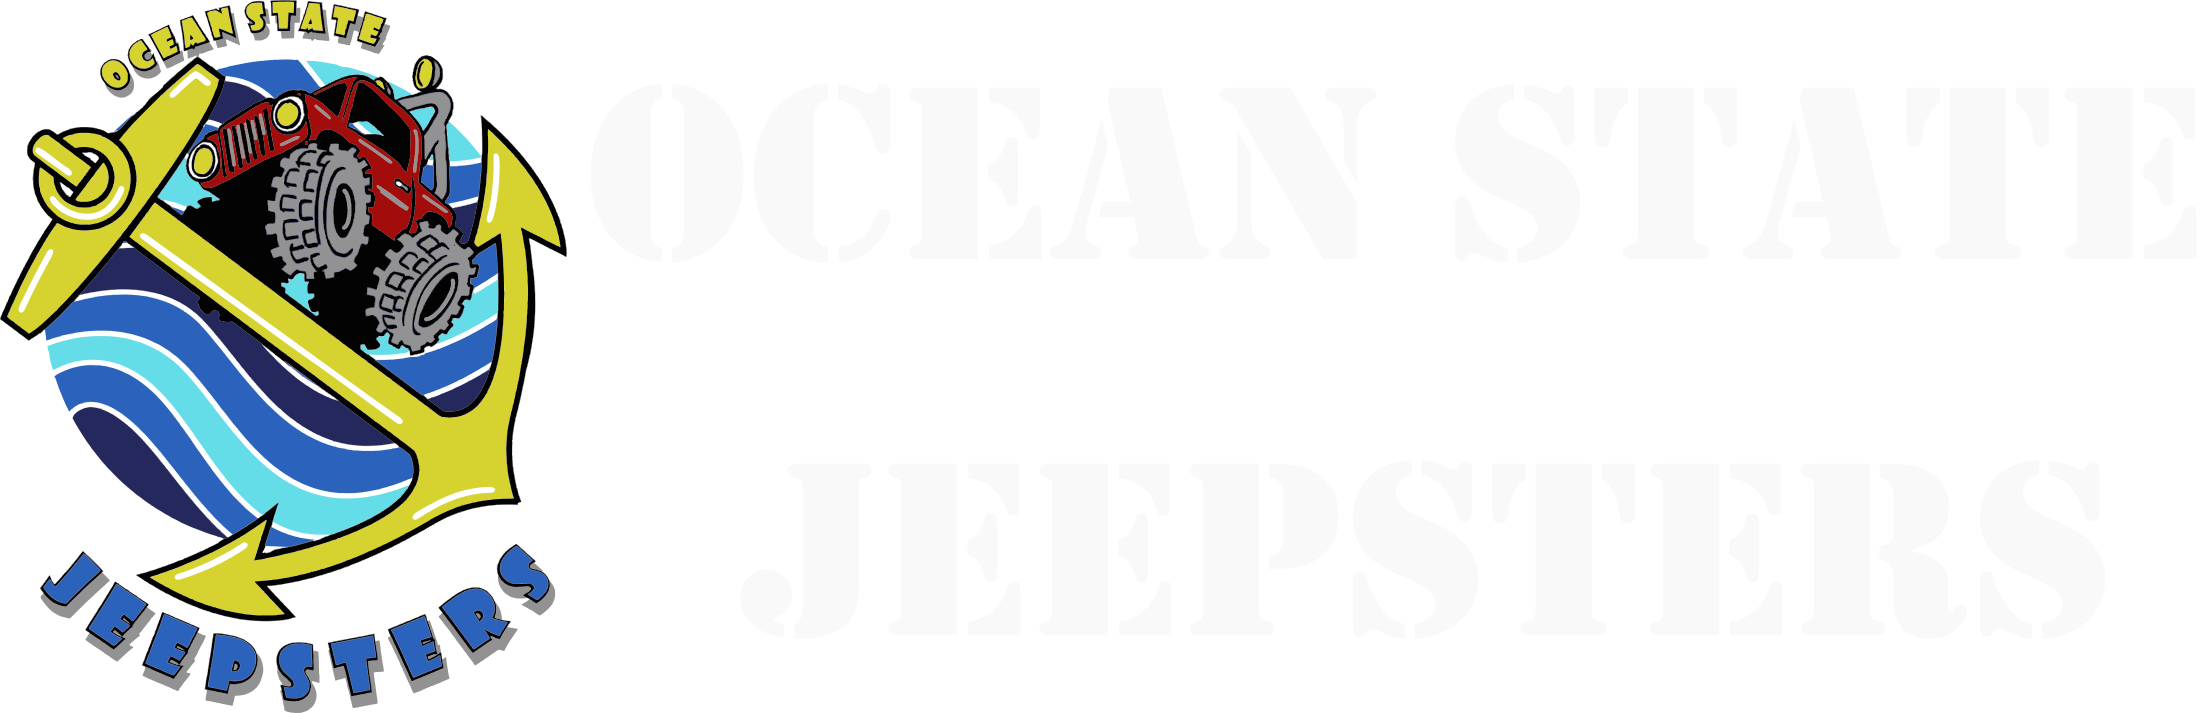 Ocean State Jeepsters